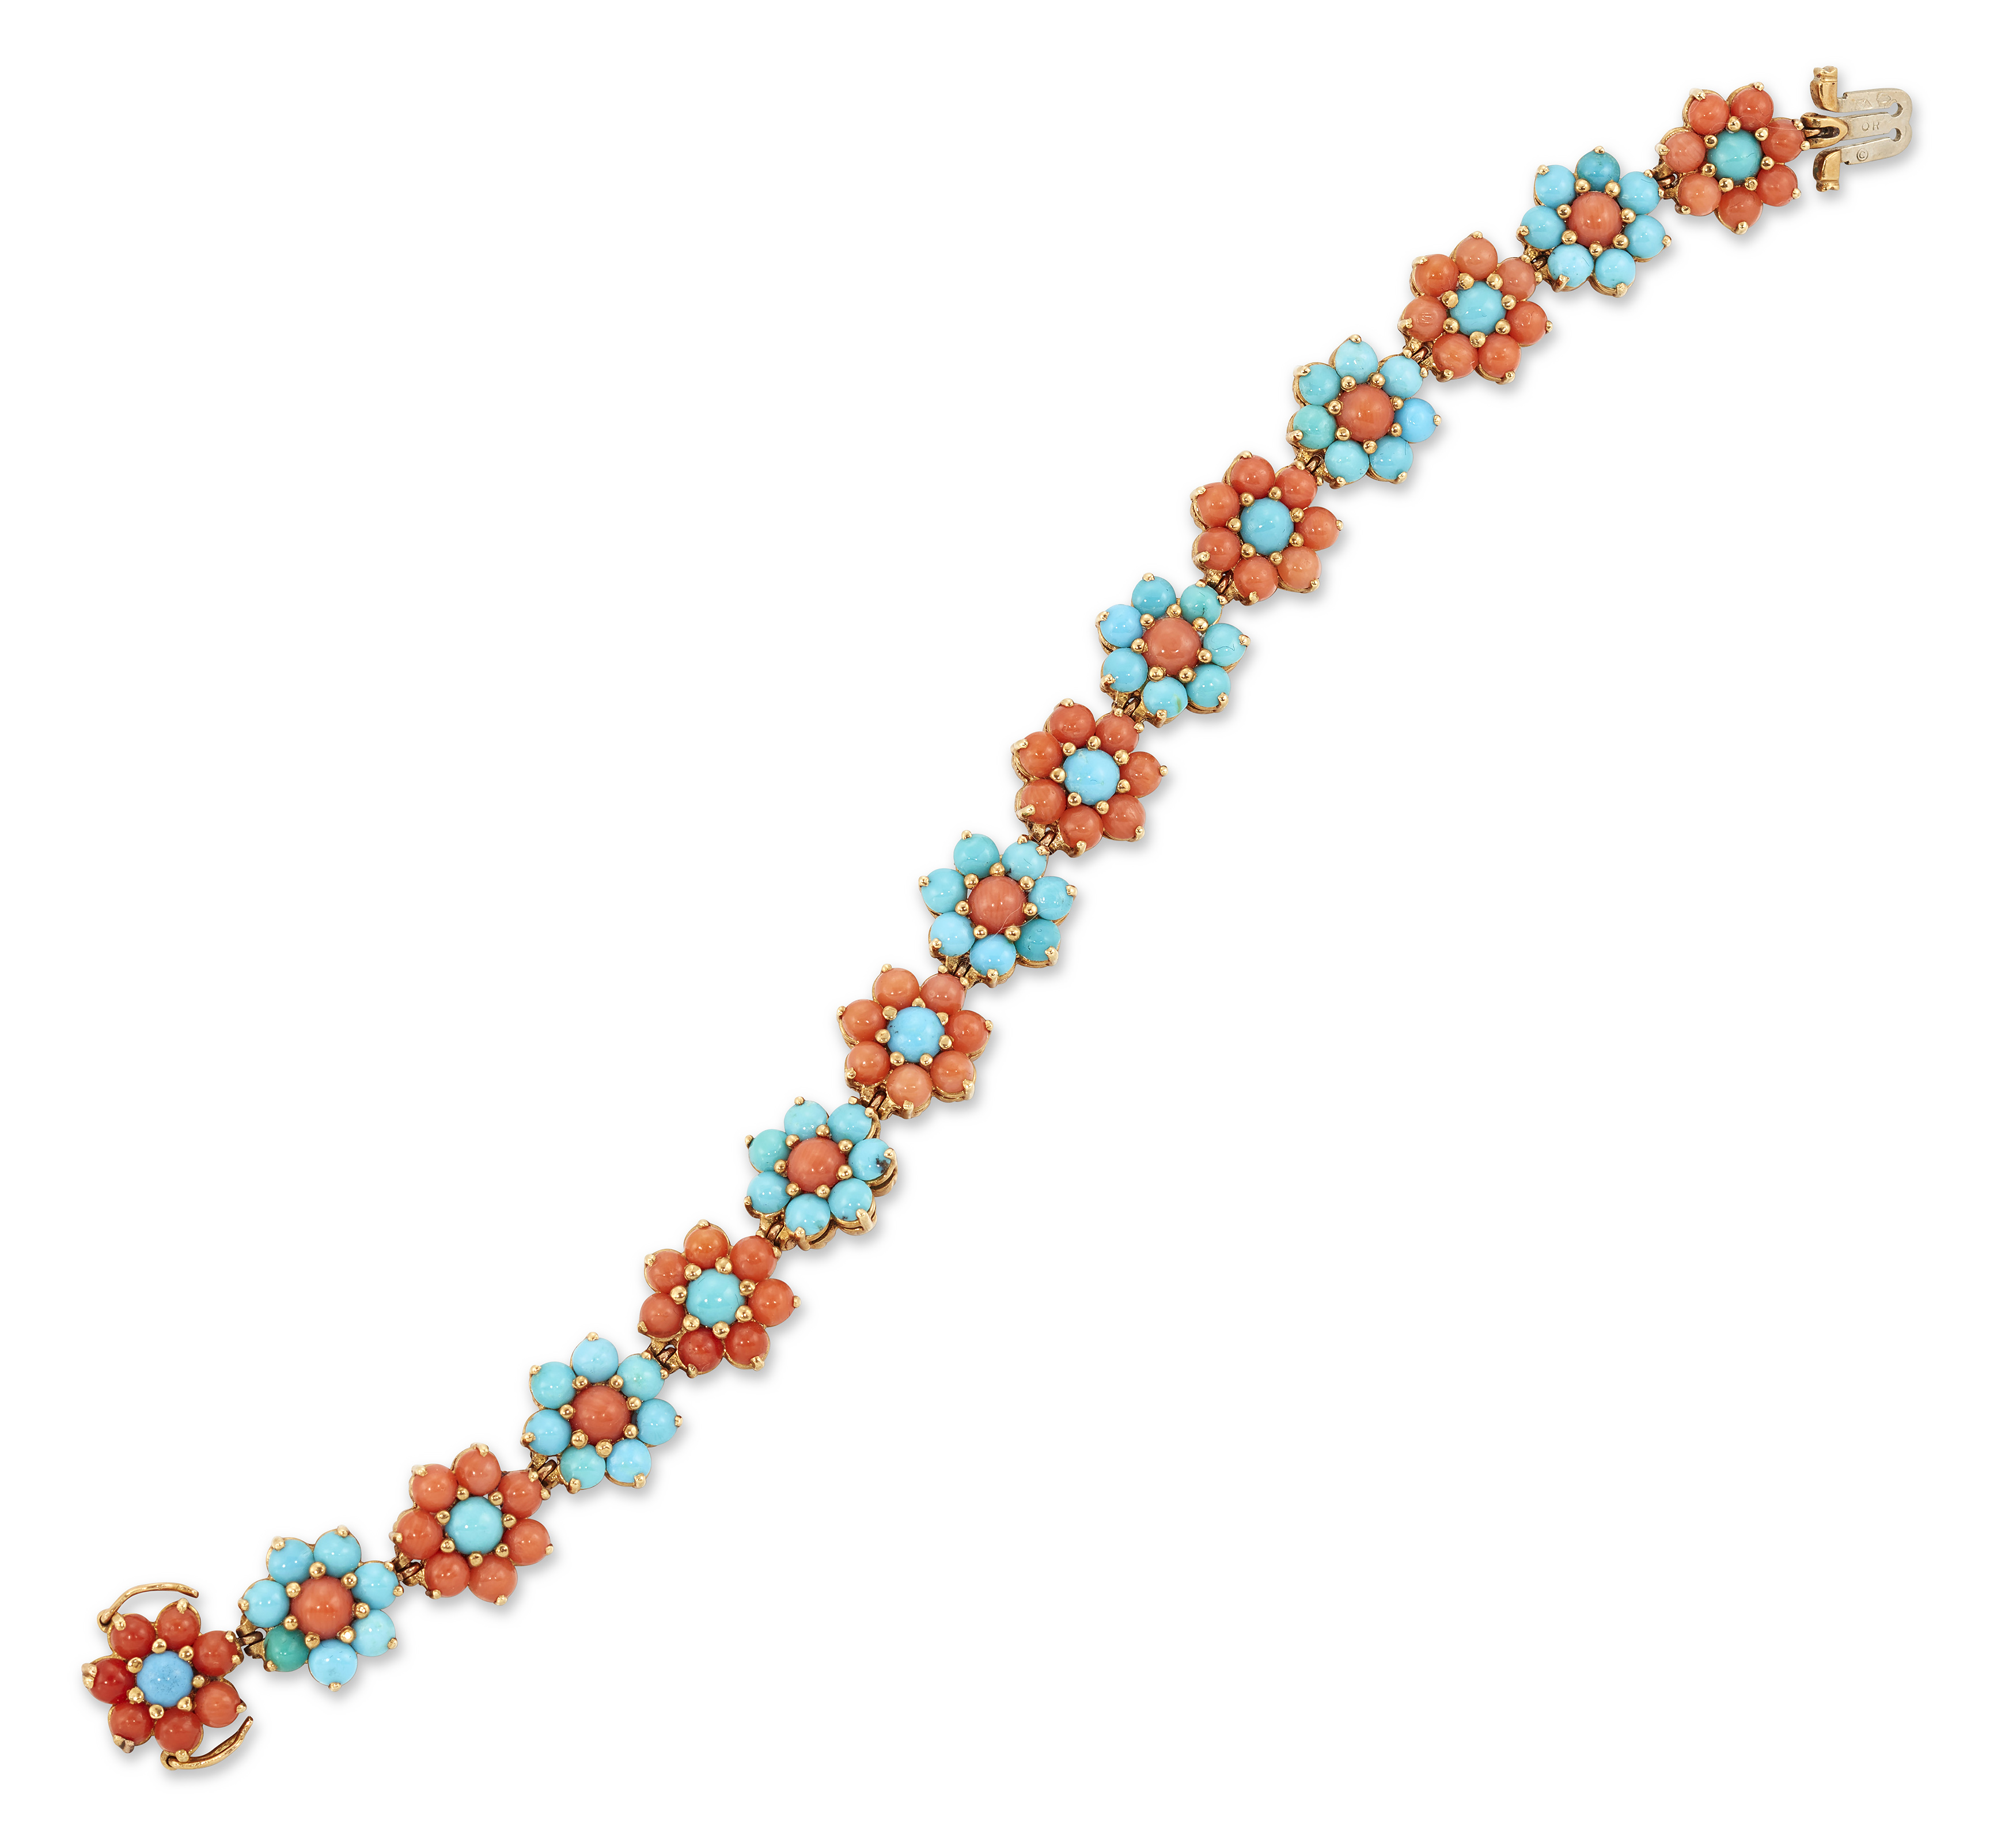 Van Cleef & Arpels. A coral and turquoise reversible bracelet, double sided floral links in alter... - Image 2 of 2